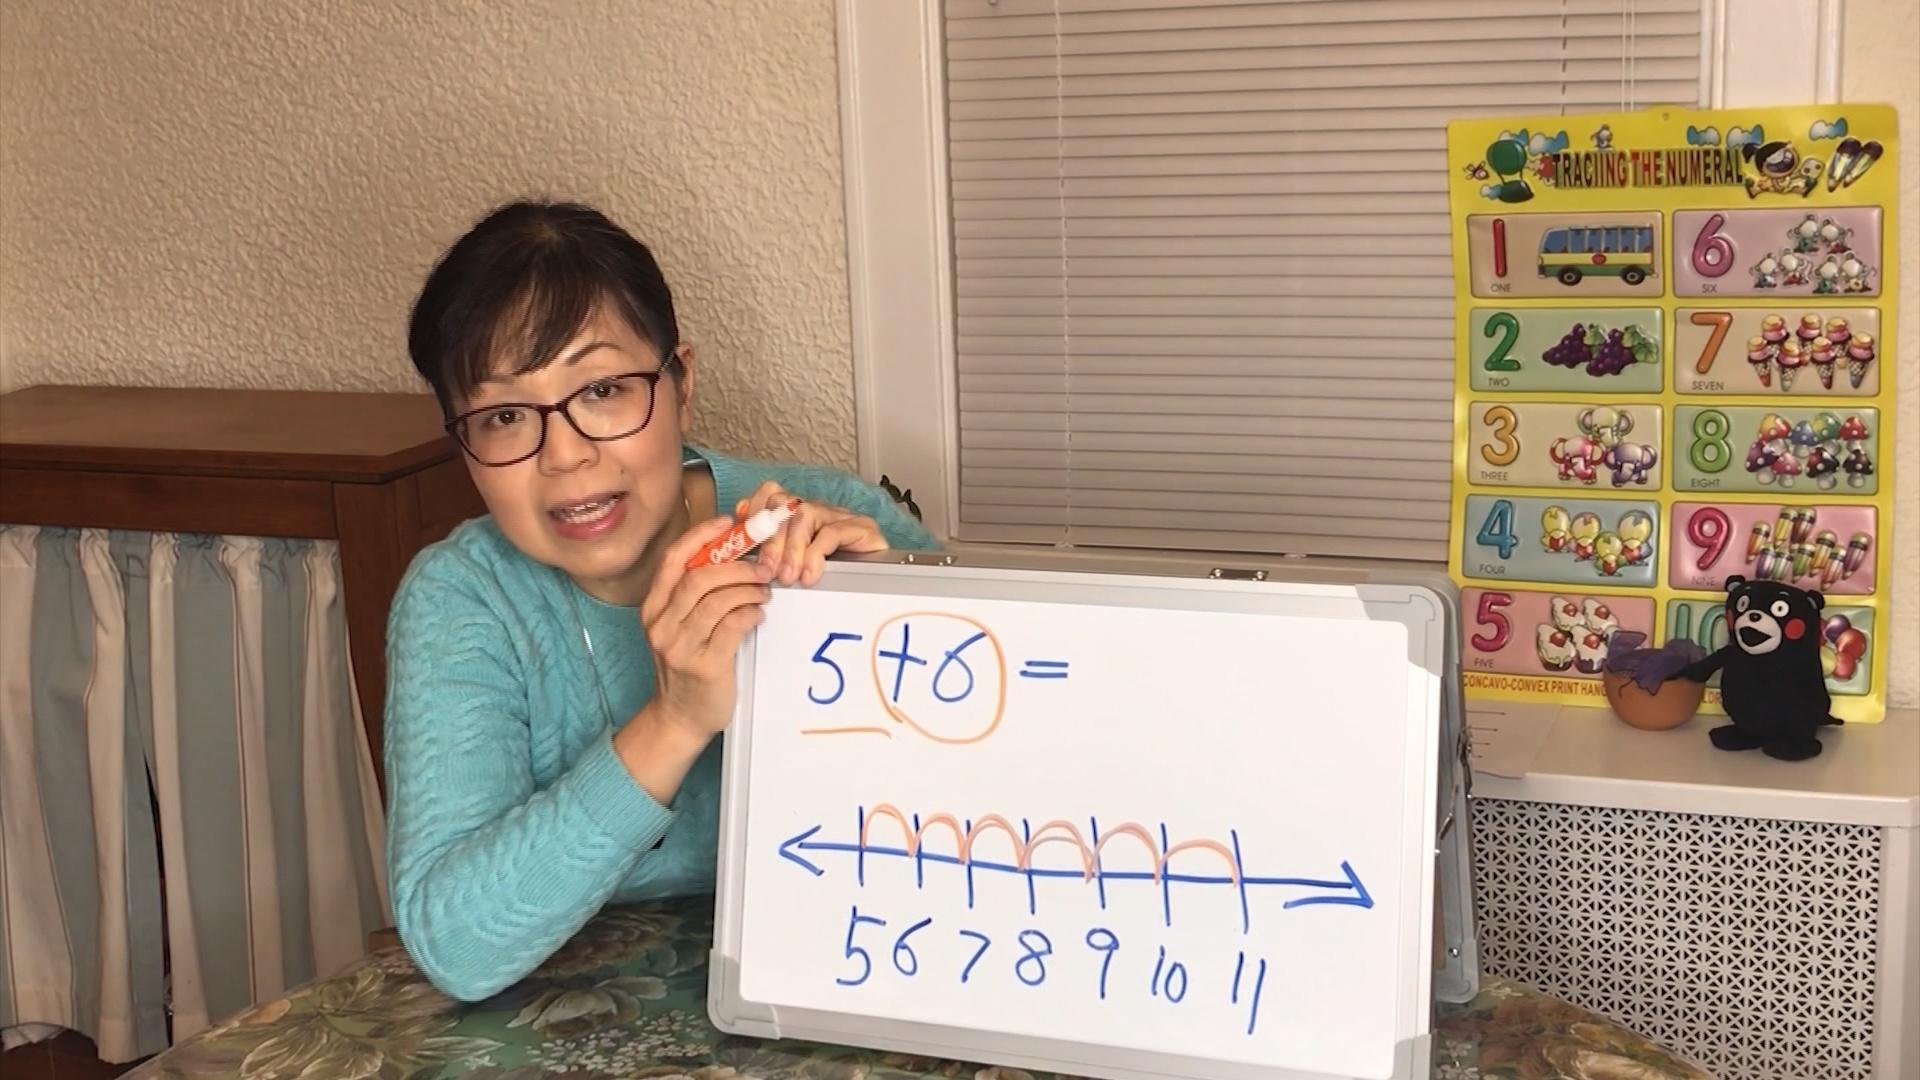 A woman holding a whiteboard with a number line drawn on it